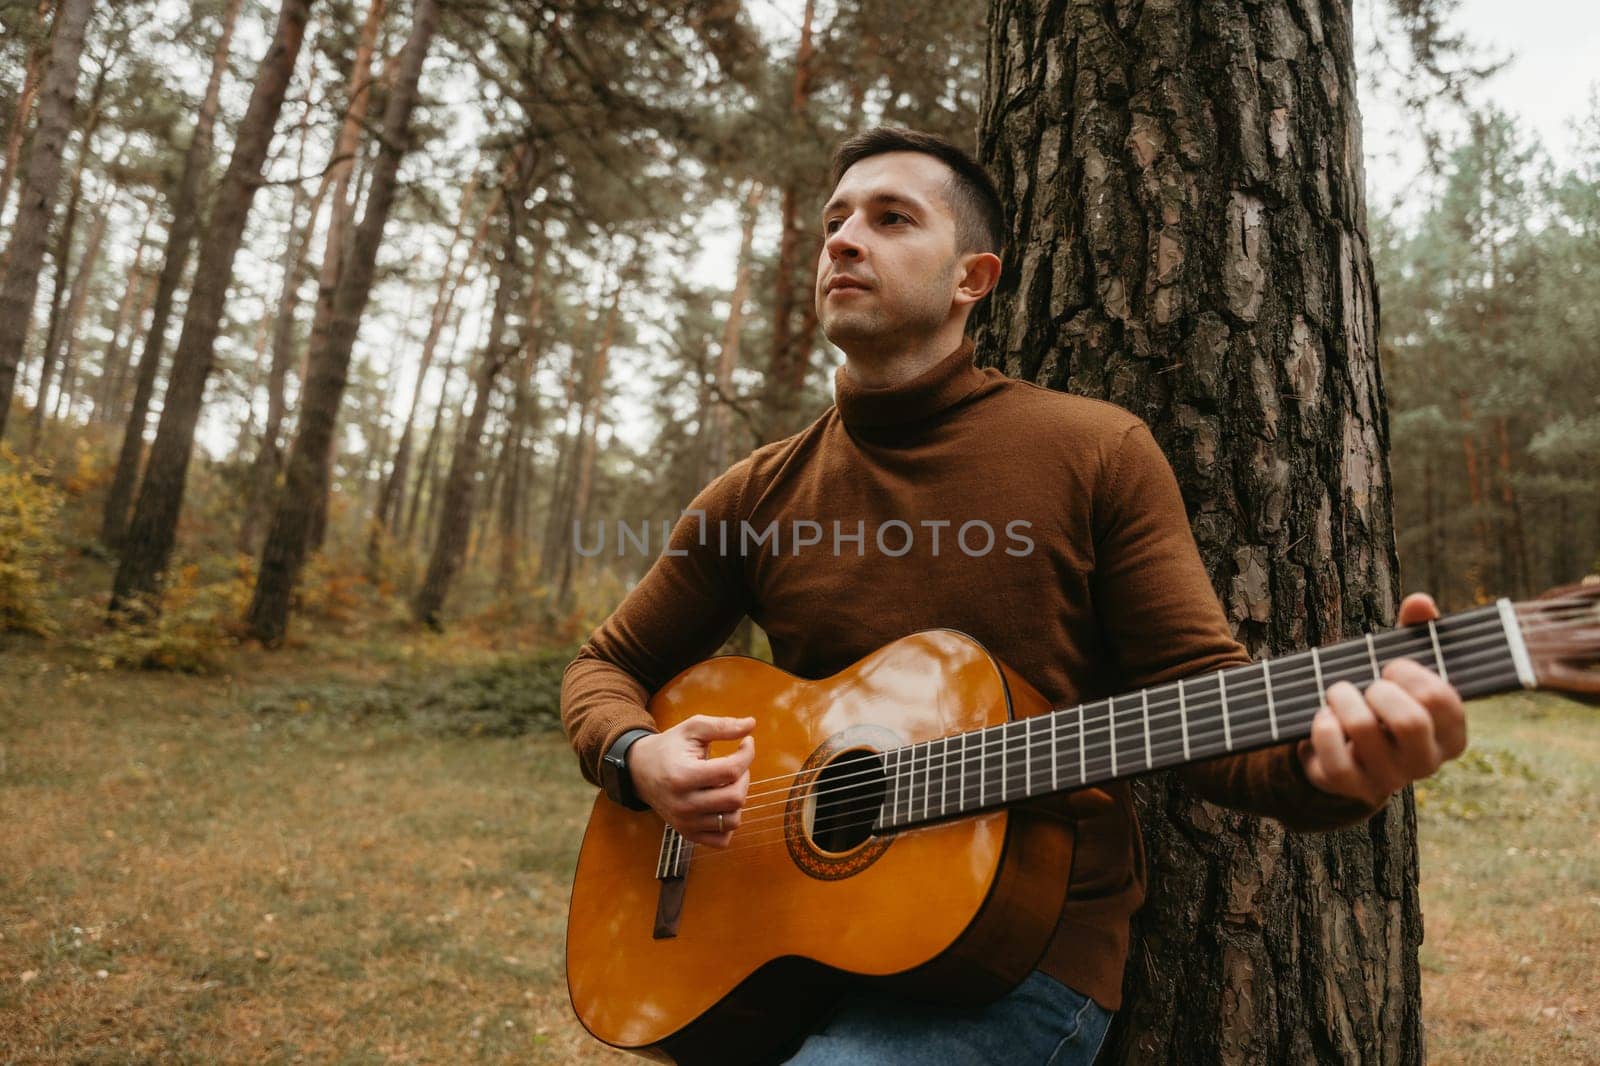 Caucasian man plays guitar leaning on tree in woods, surrounded by nature